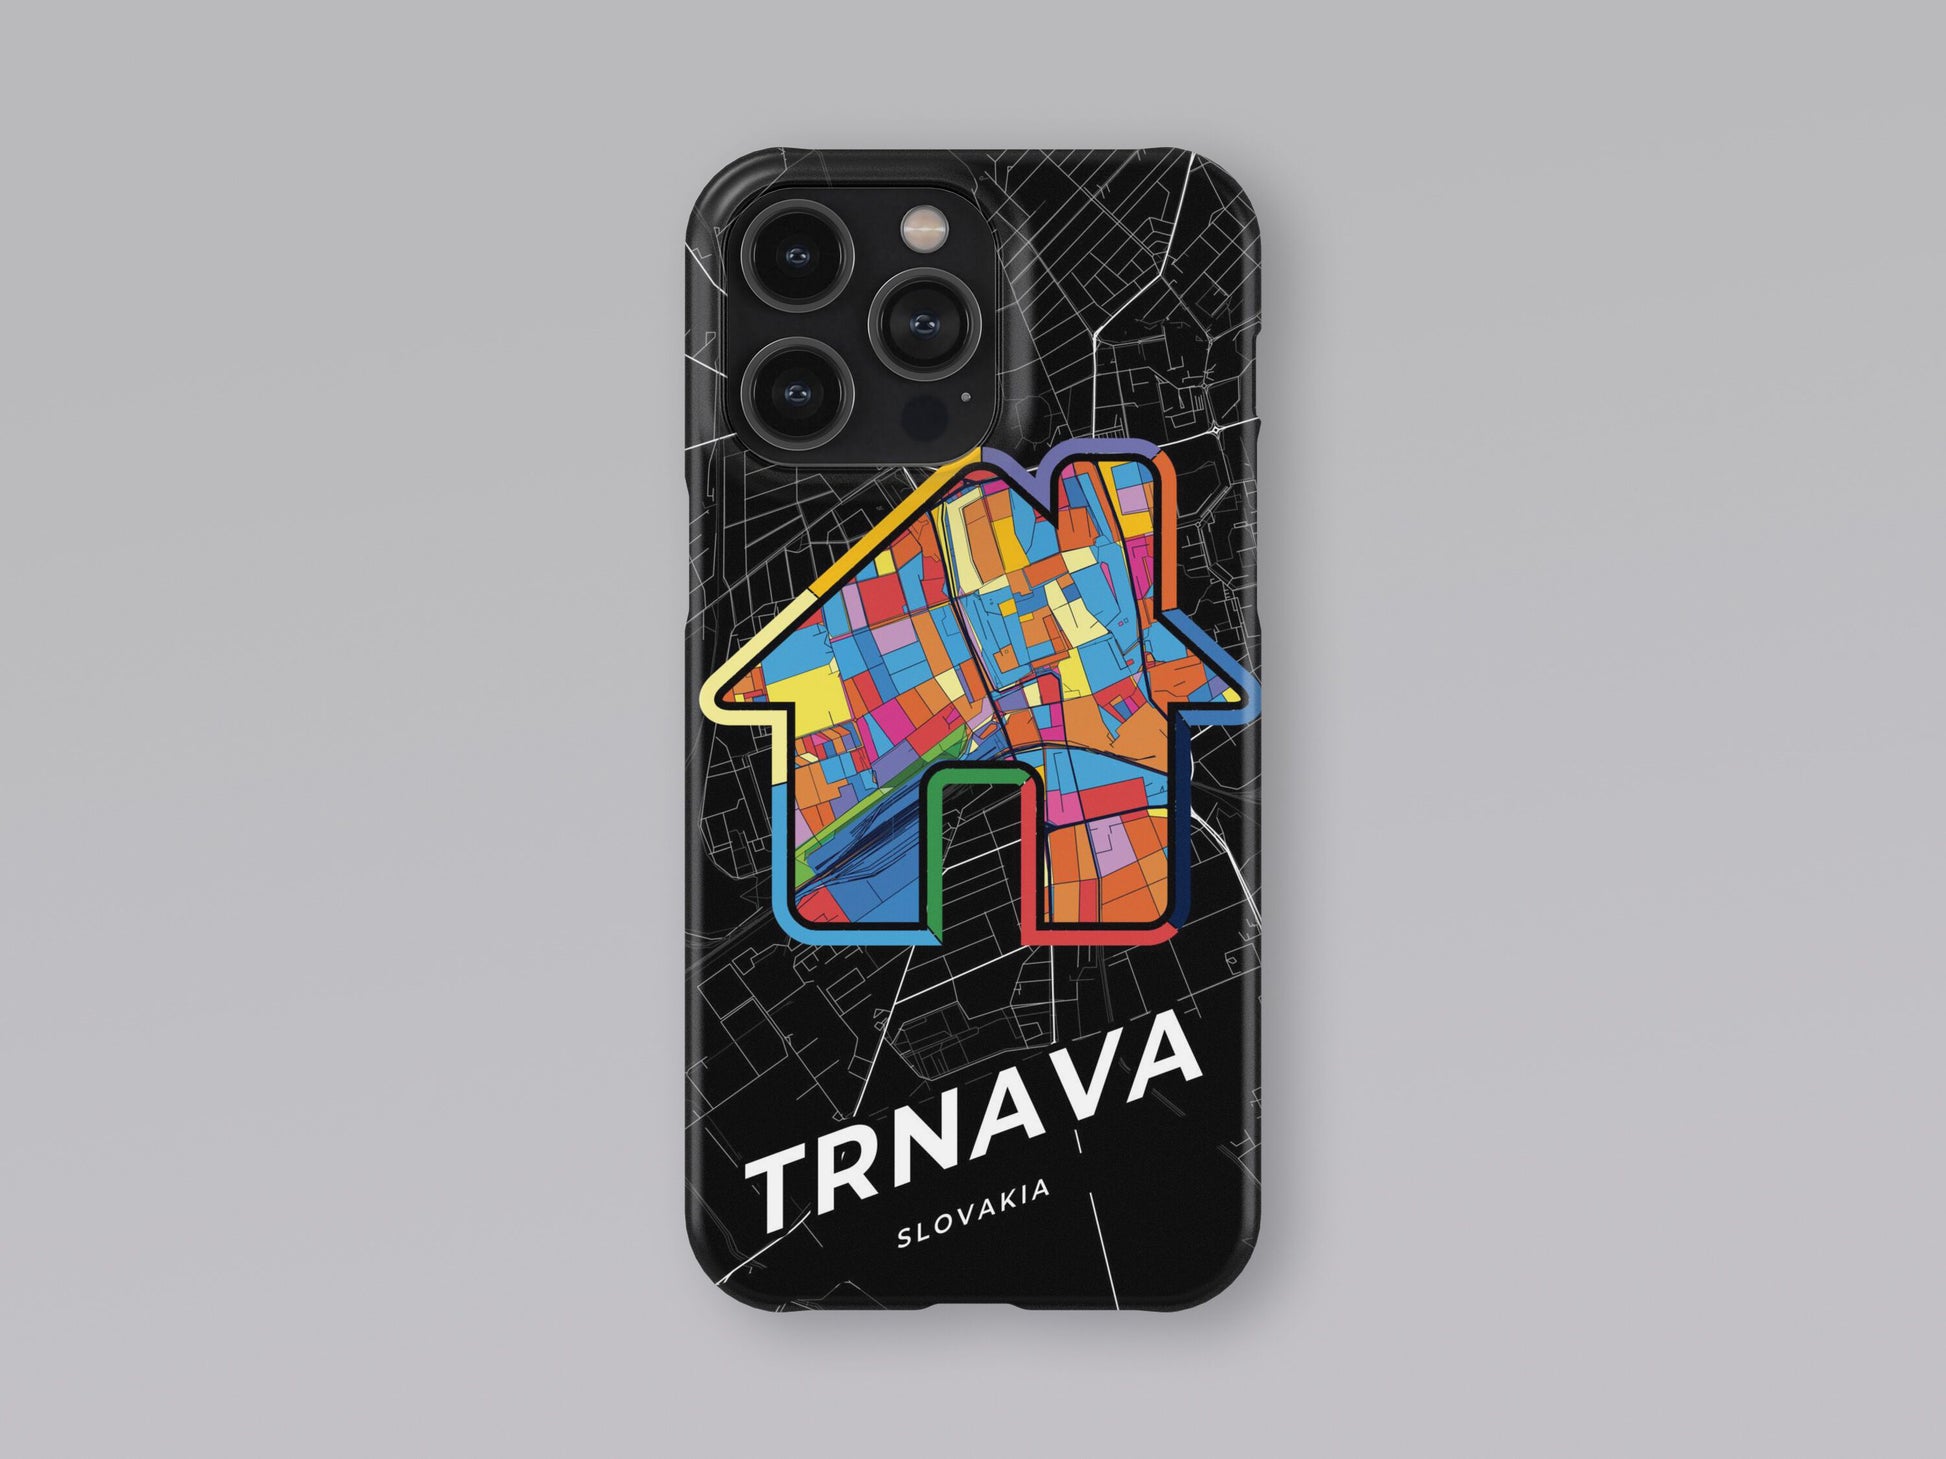 Trnava Slovakia slim phone case with colorful icon. Birthday, wedding or housewarming gift. Couple match cases. 3